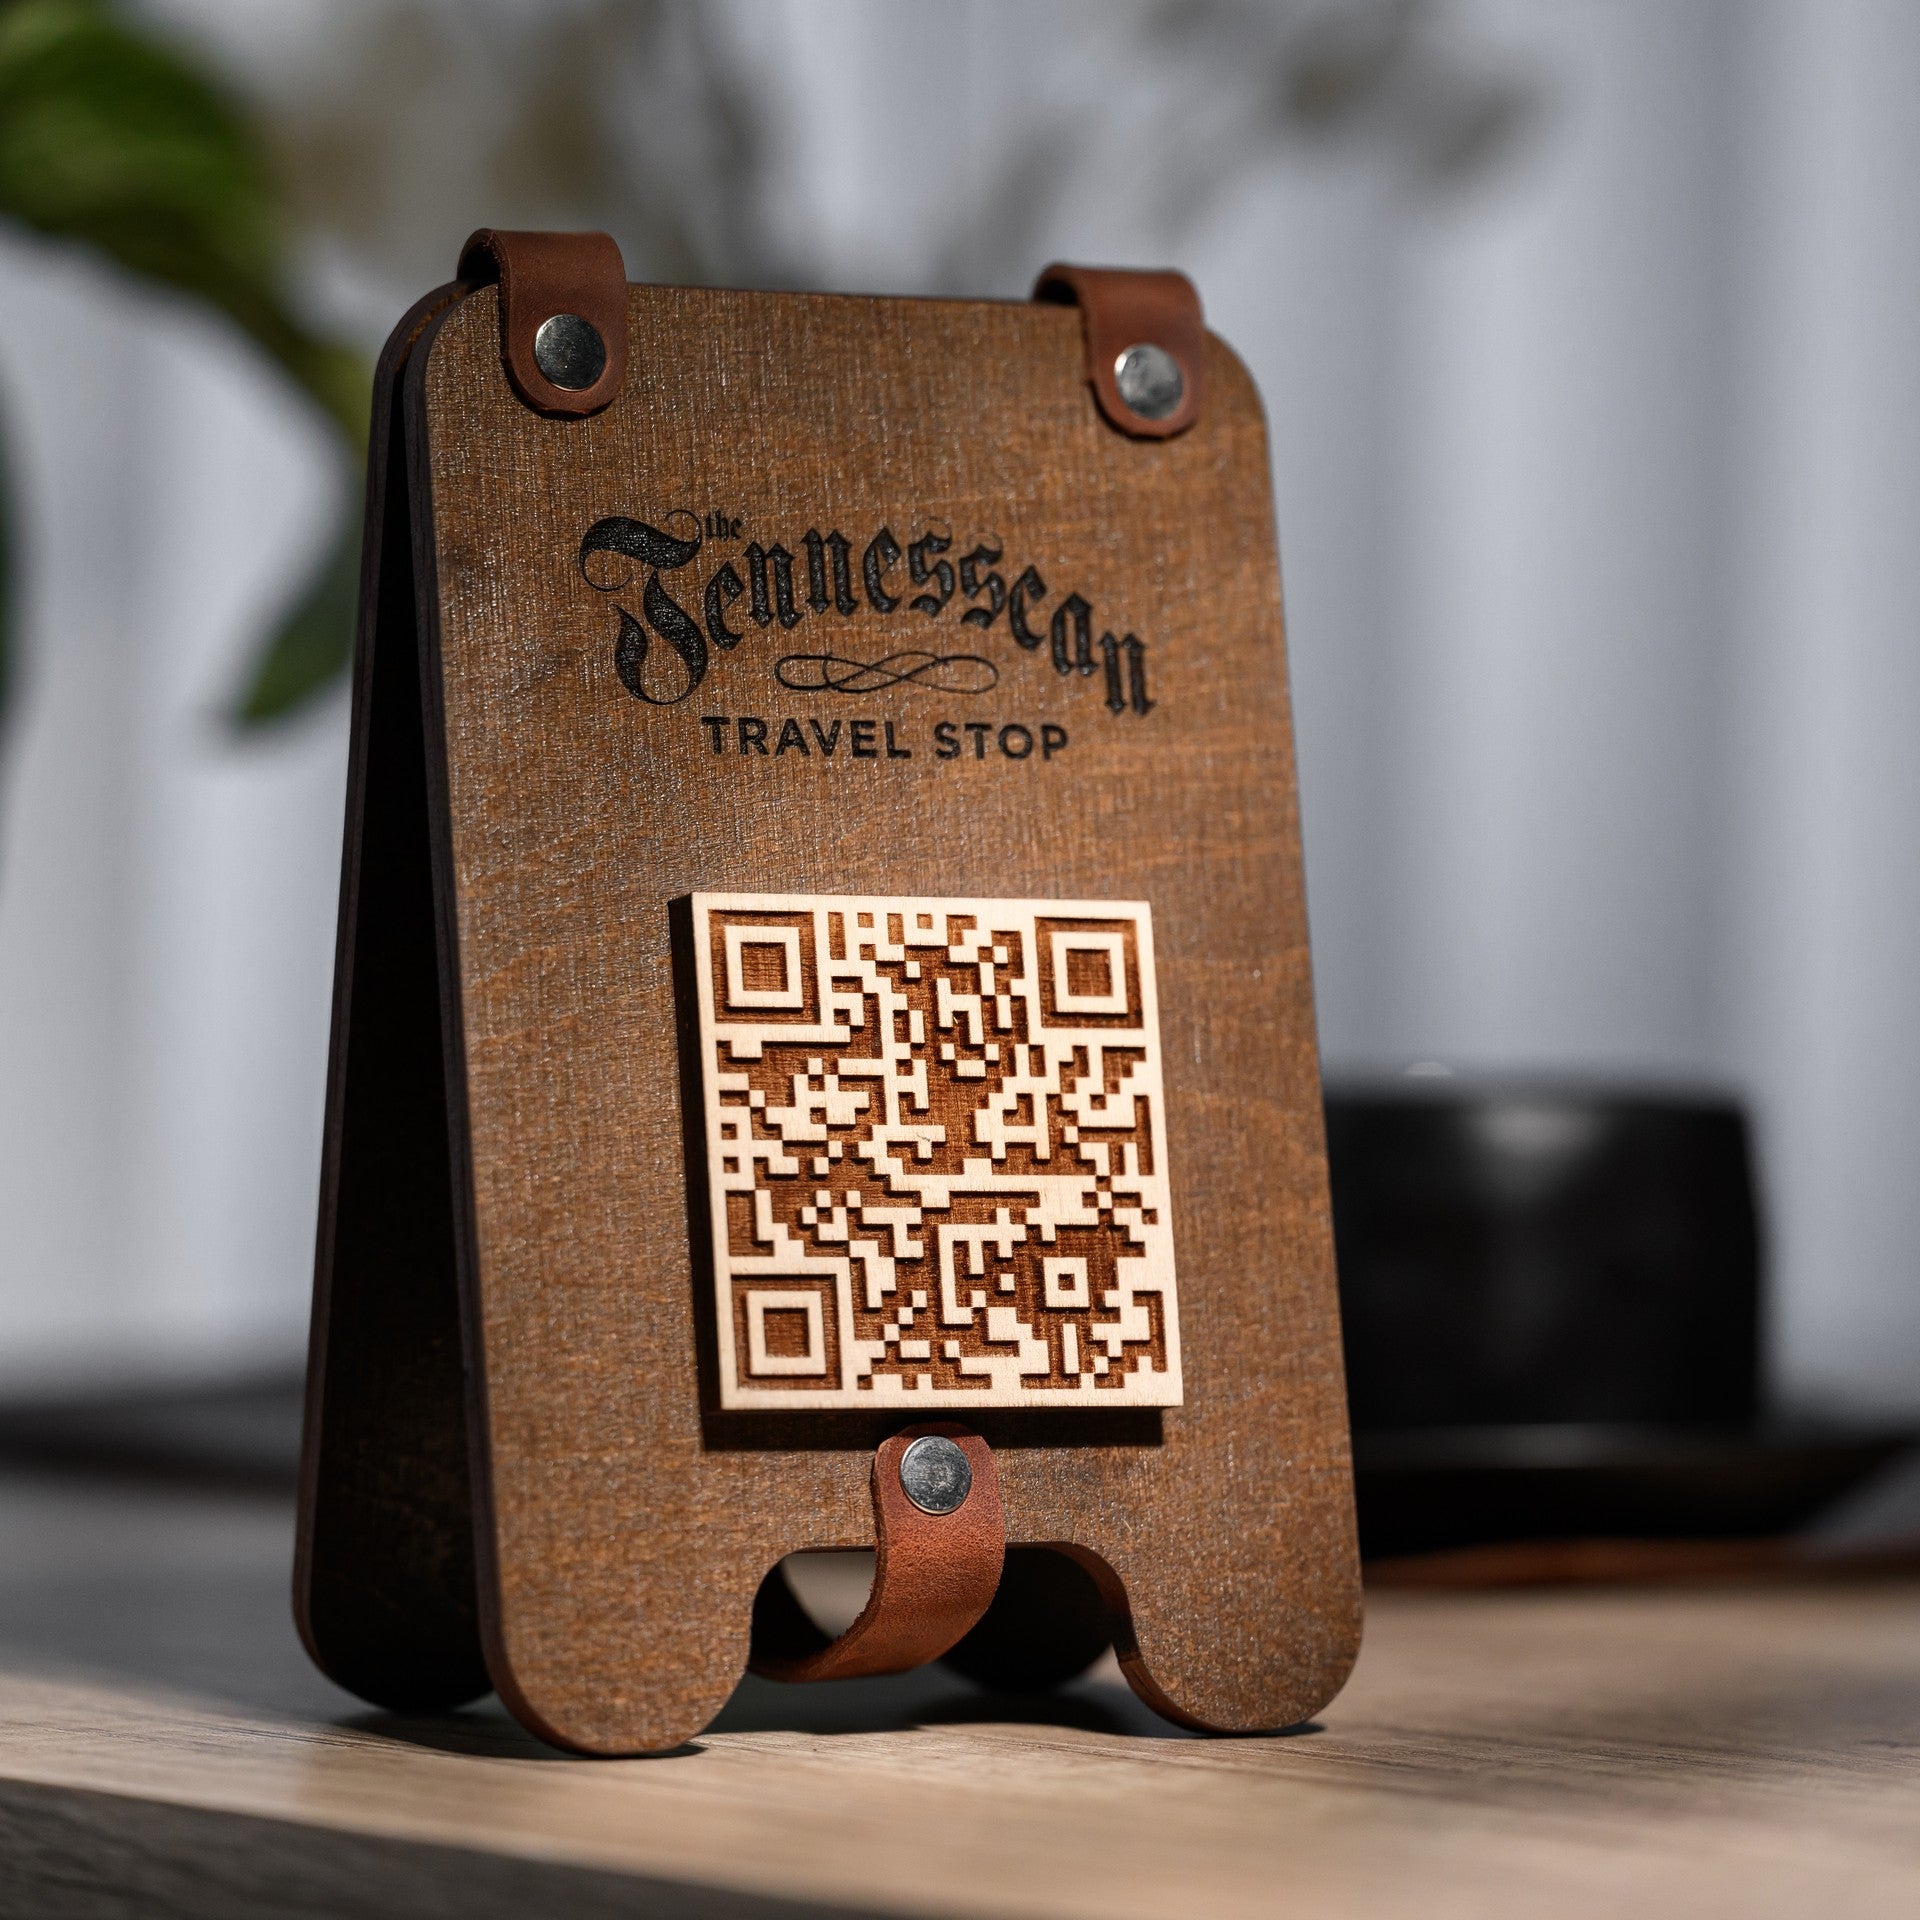 Touchless Menu QR Code Stand for restaurants. Scan to pay sign for efficient access to menus and payment options.